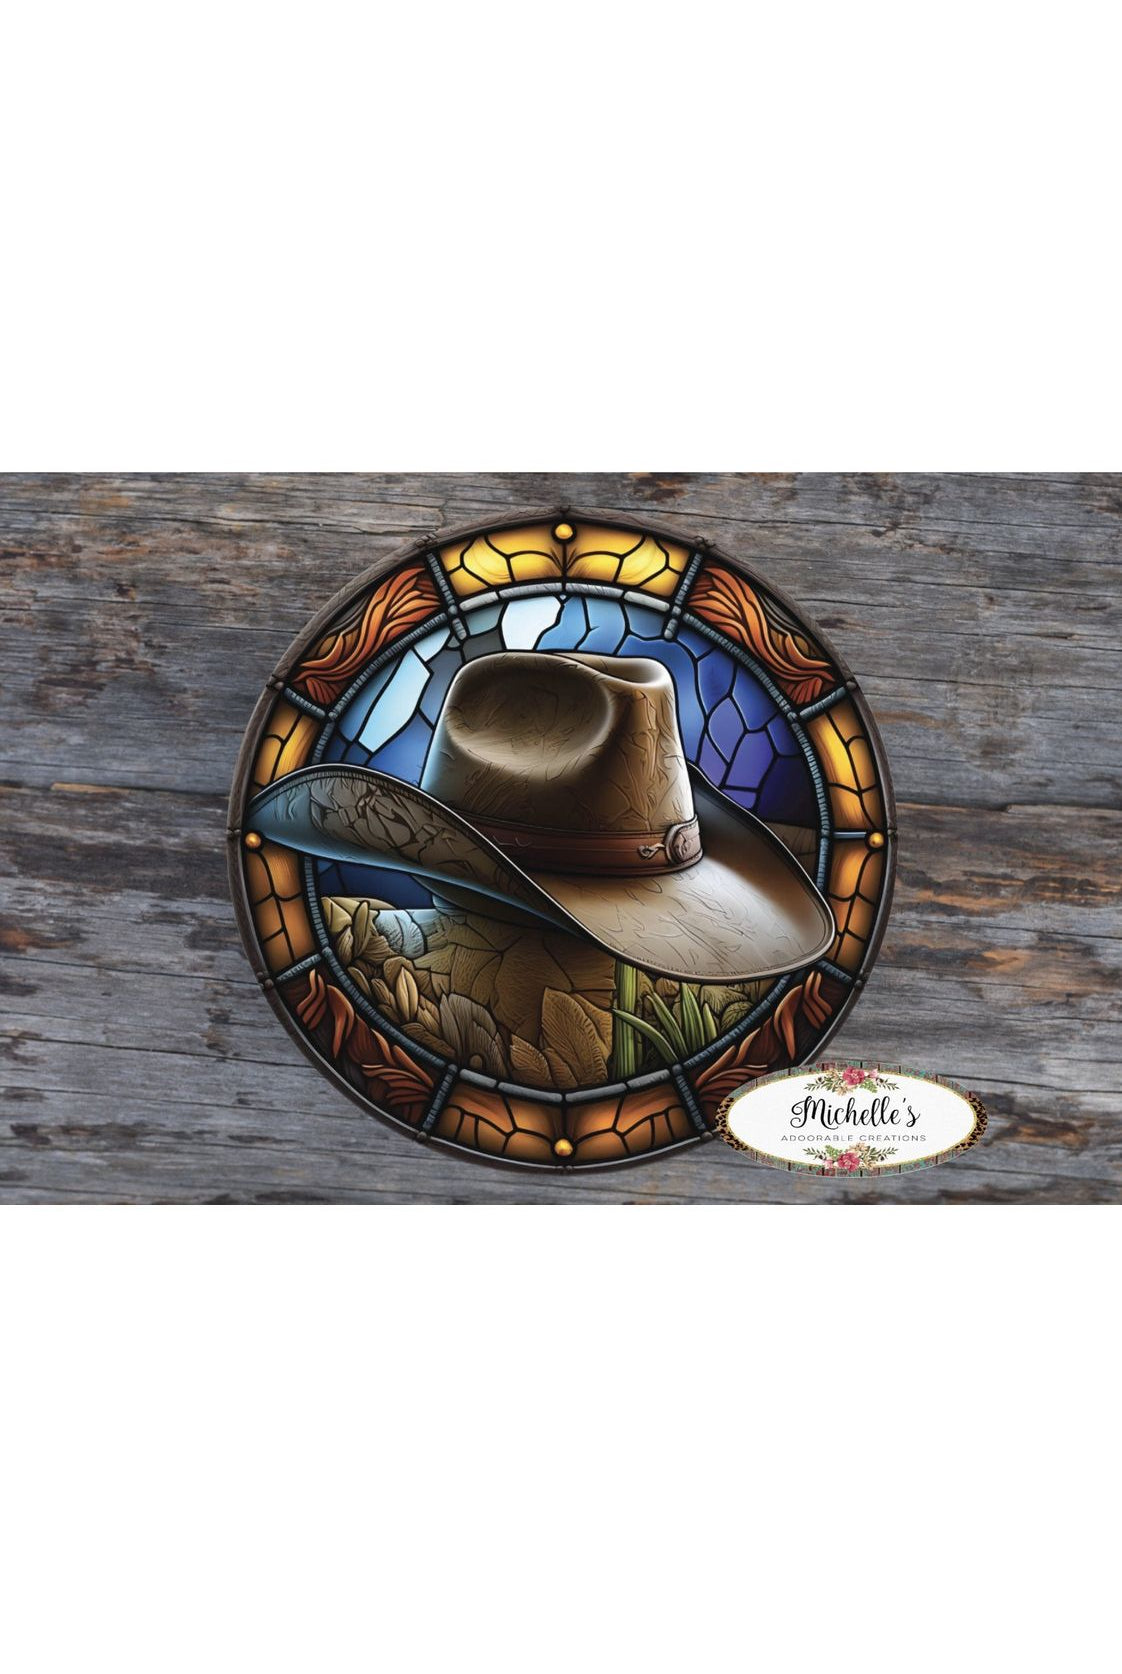 Faux Stained Glass Cowboy Hat Western Sign - Wreath Enhancement - Michelle's aDOORable Creations - Signature Signs